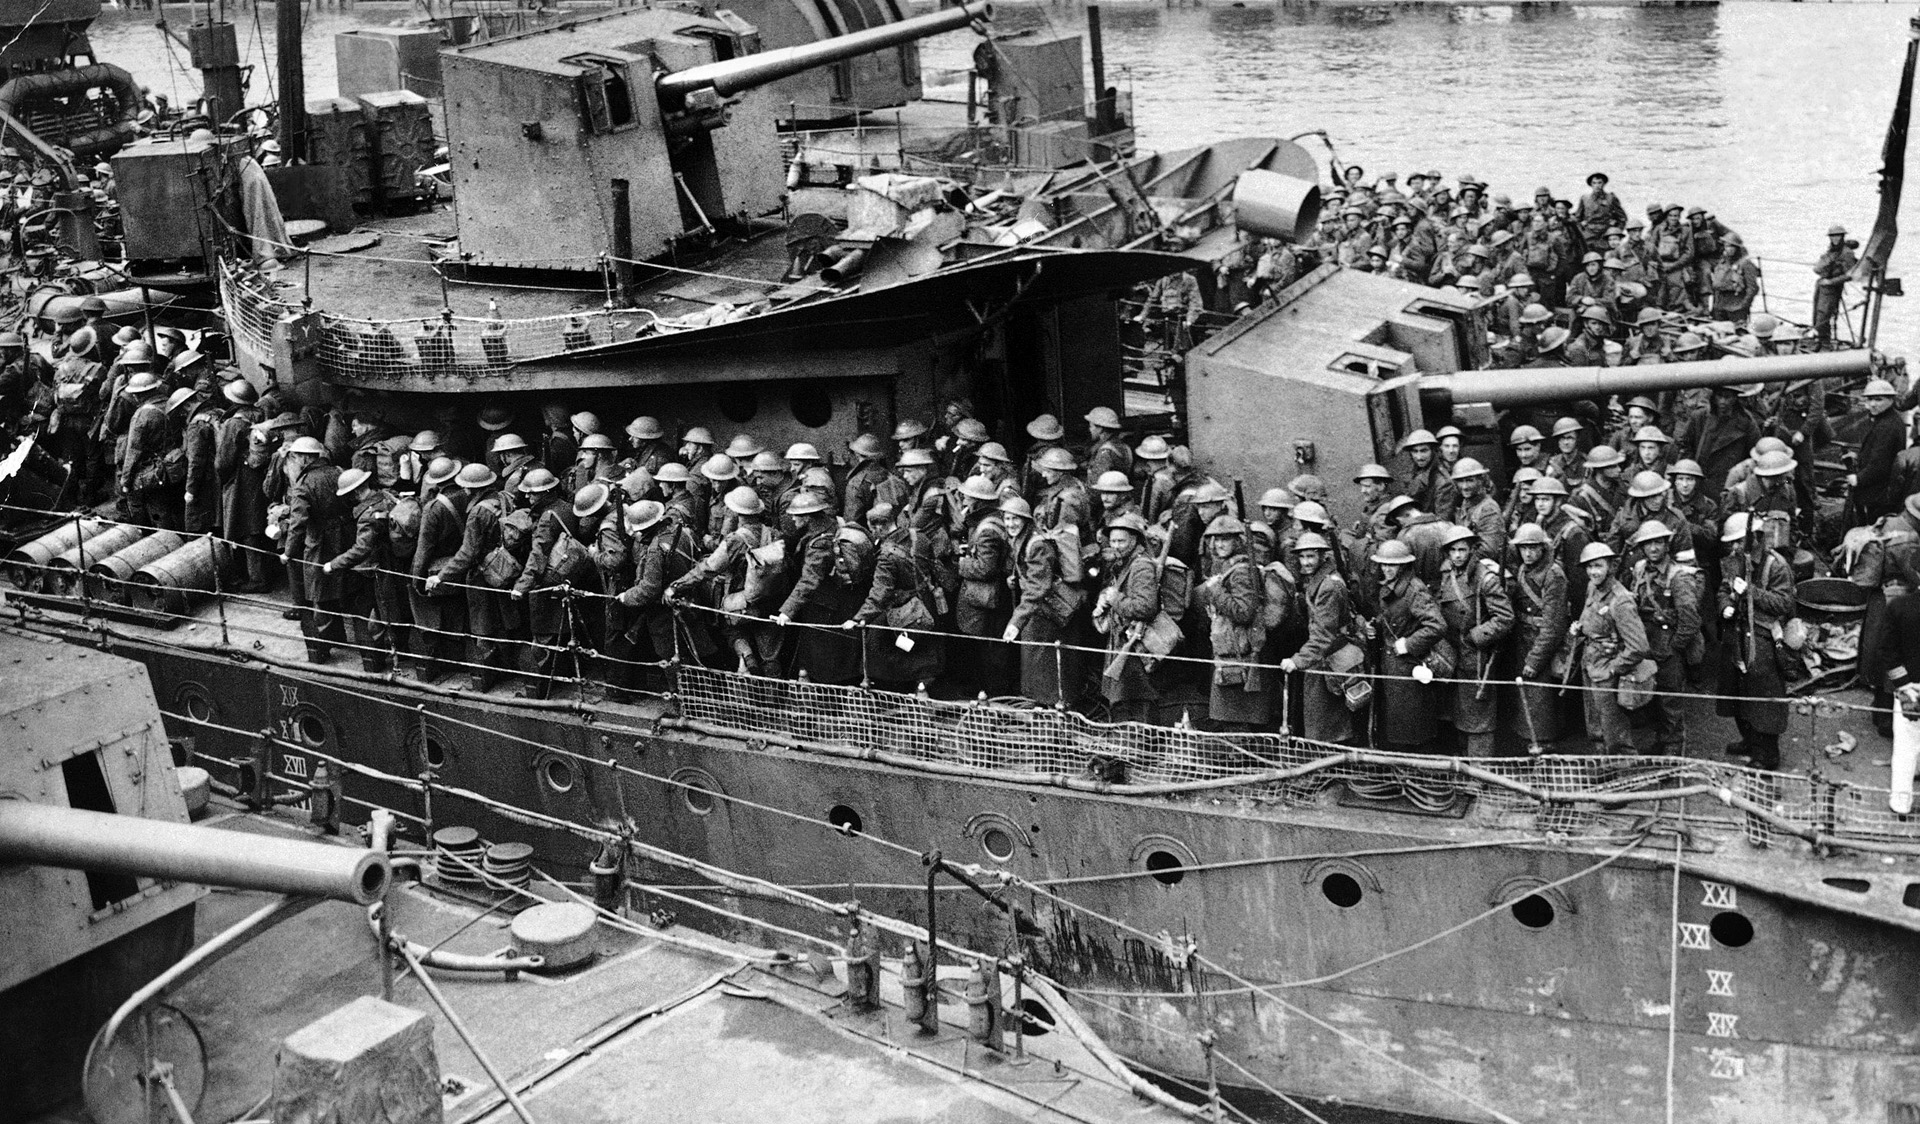 British soldiers, freshly rescued from Dunkirk, crowd the rail of a Royal Navy ship that is preparing to dock at a port in Britain on June 1, 1940. Admiral Sir Bertram Ramsay led the successful effort of Operation Dynamo.